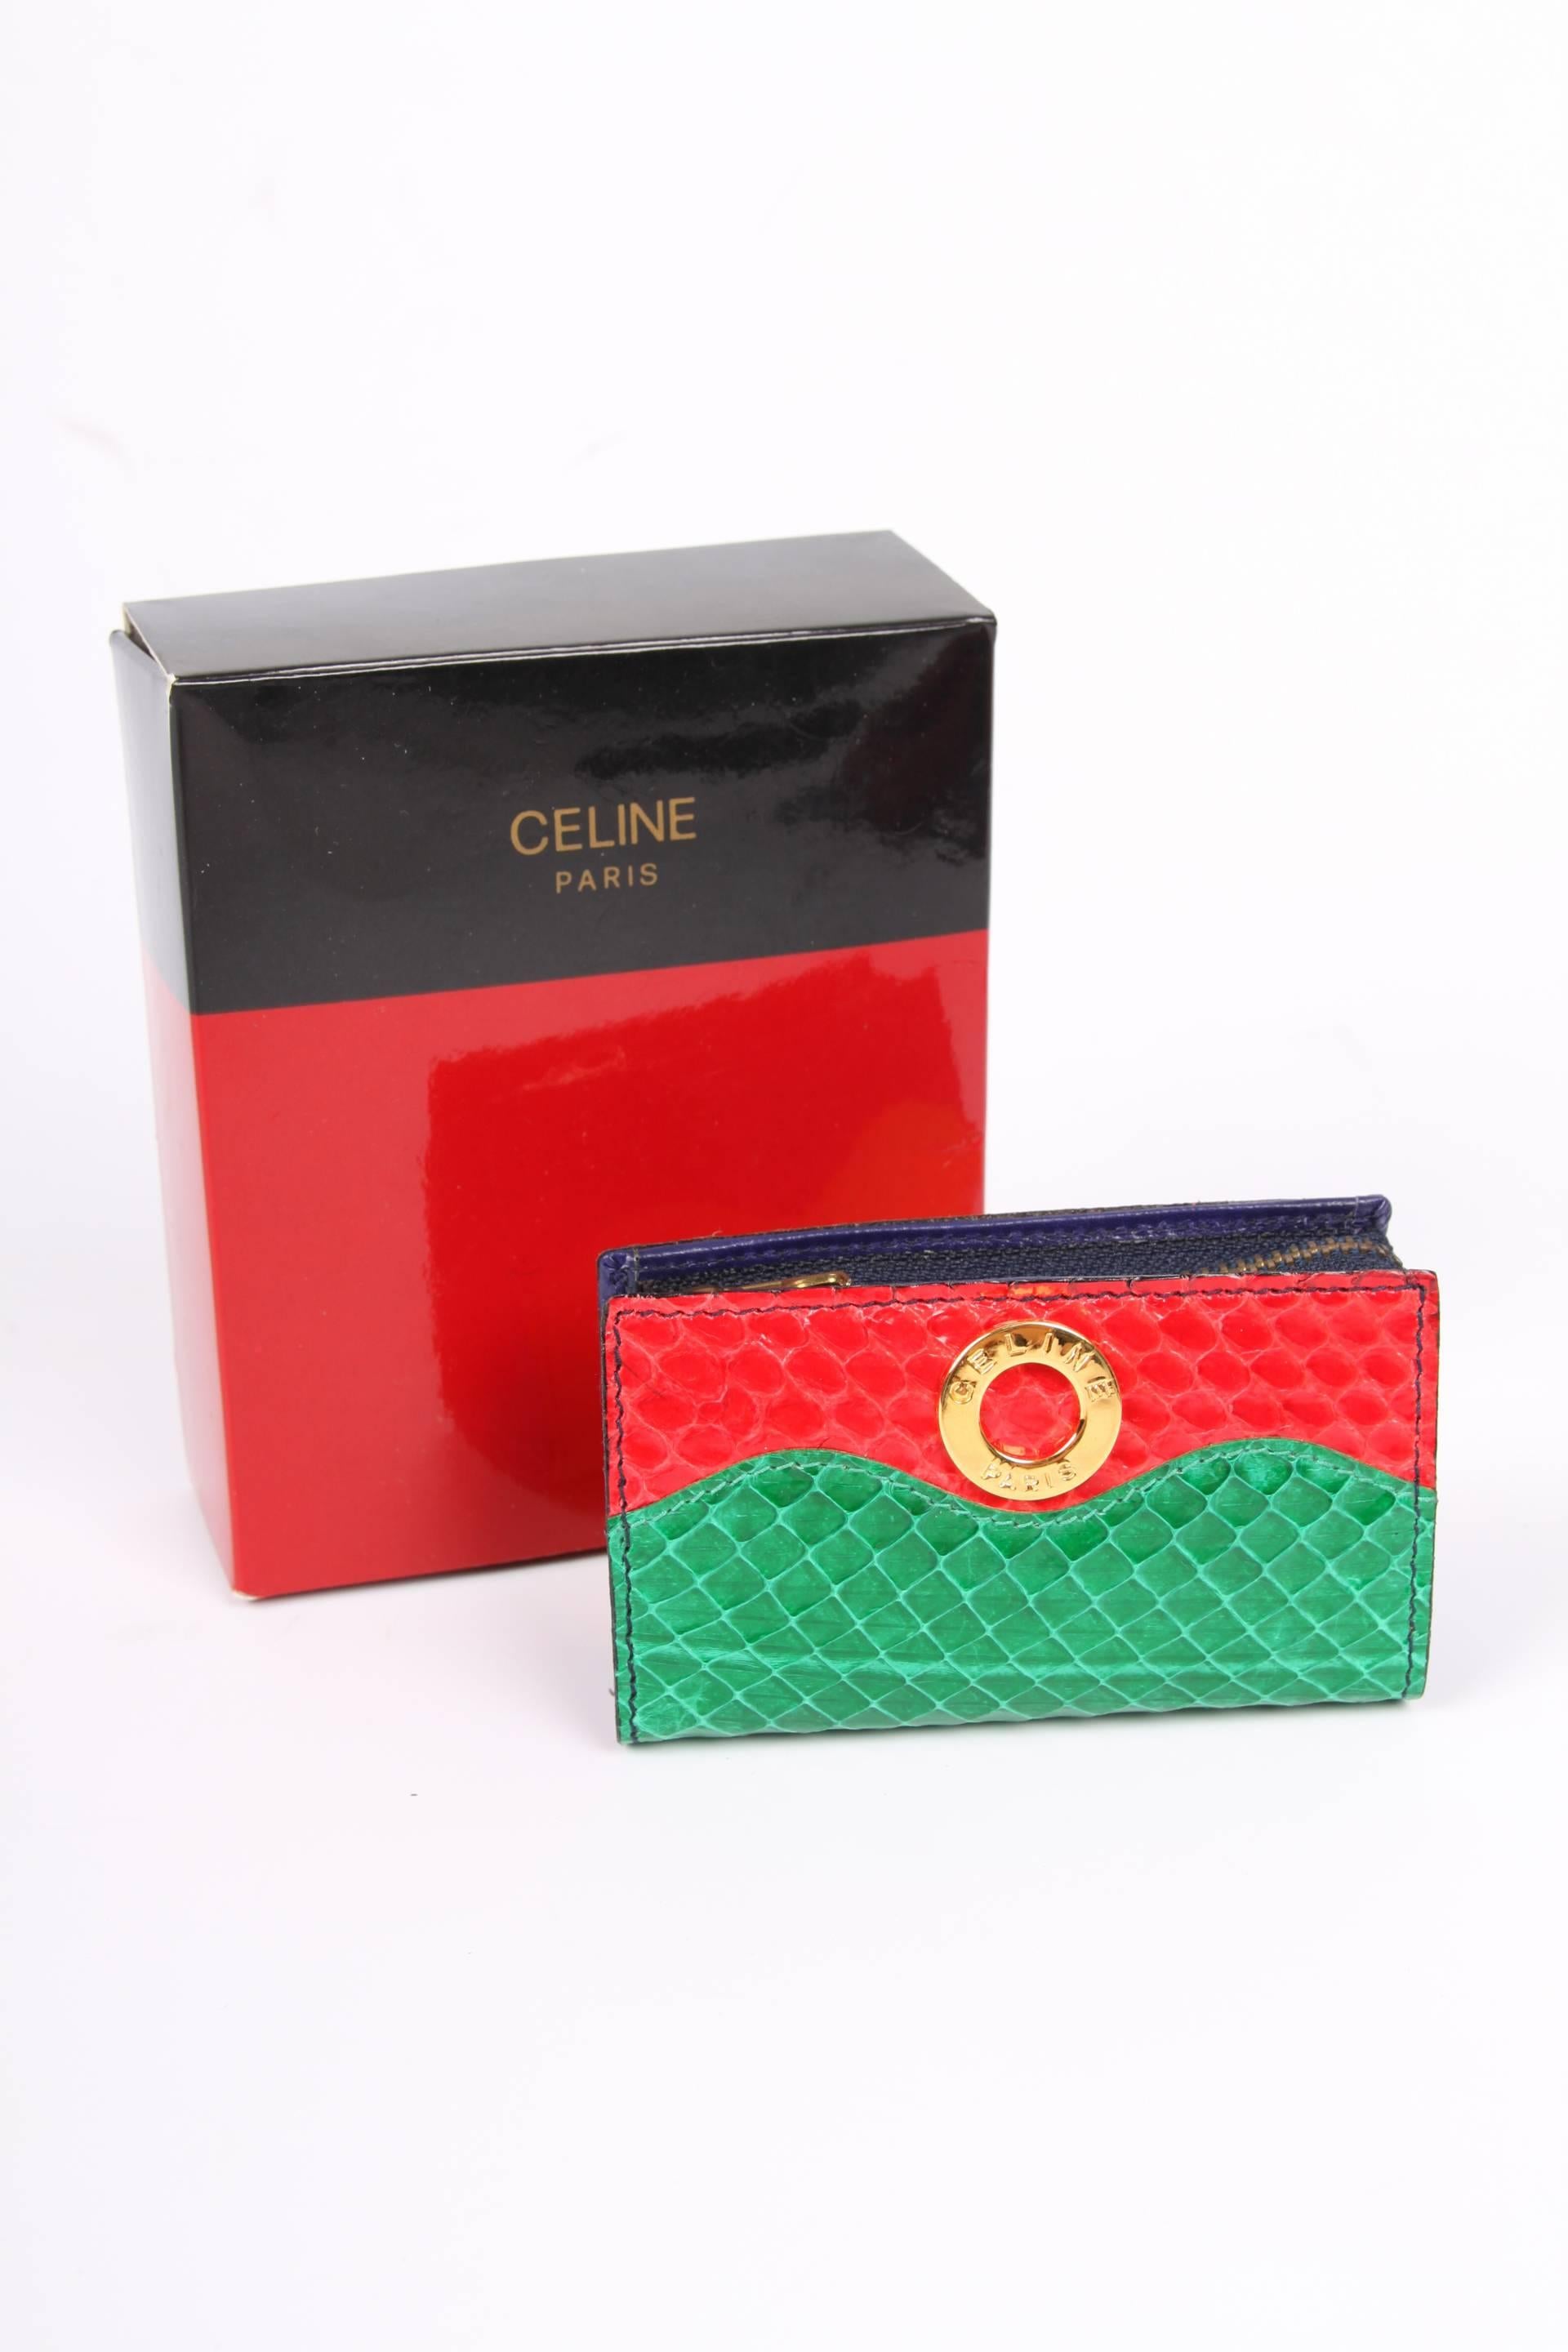 Super cute vintage mini bag by Céline Paris crafted in red, green, blue and yellow python leather.

Zip top closure, a gold-tone metal logo at the front and lining in dark blue leather. It will fit a lipstick, some coins and a tampax. That's about